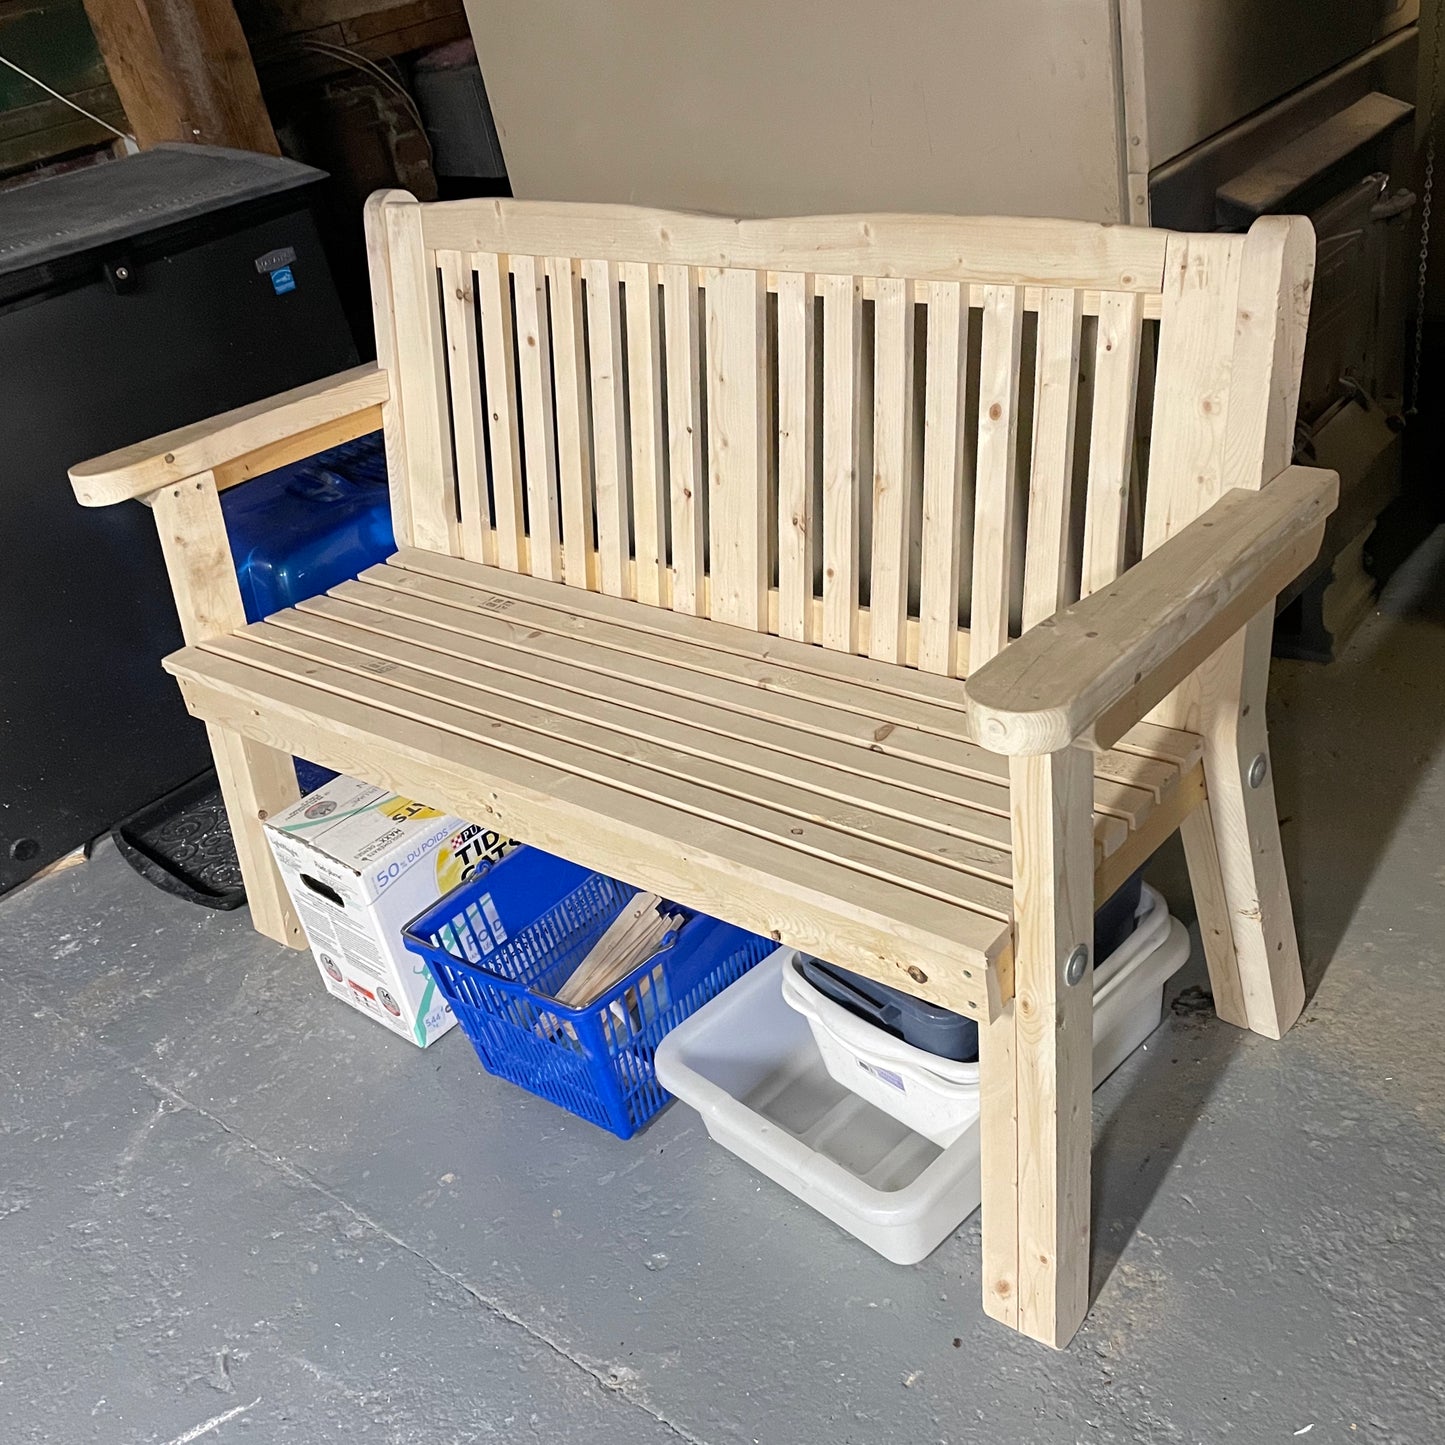 Completed bench built from out garden bench woodworking diy plan